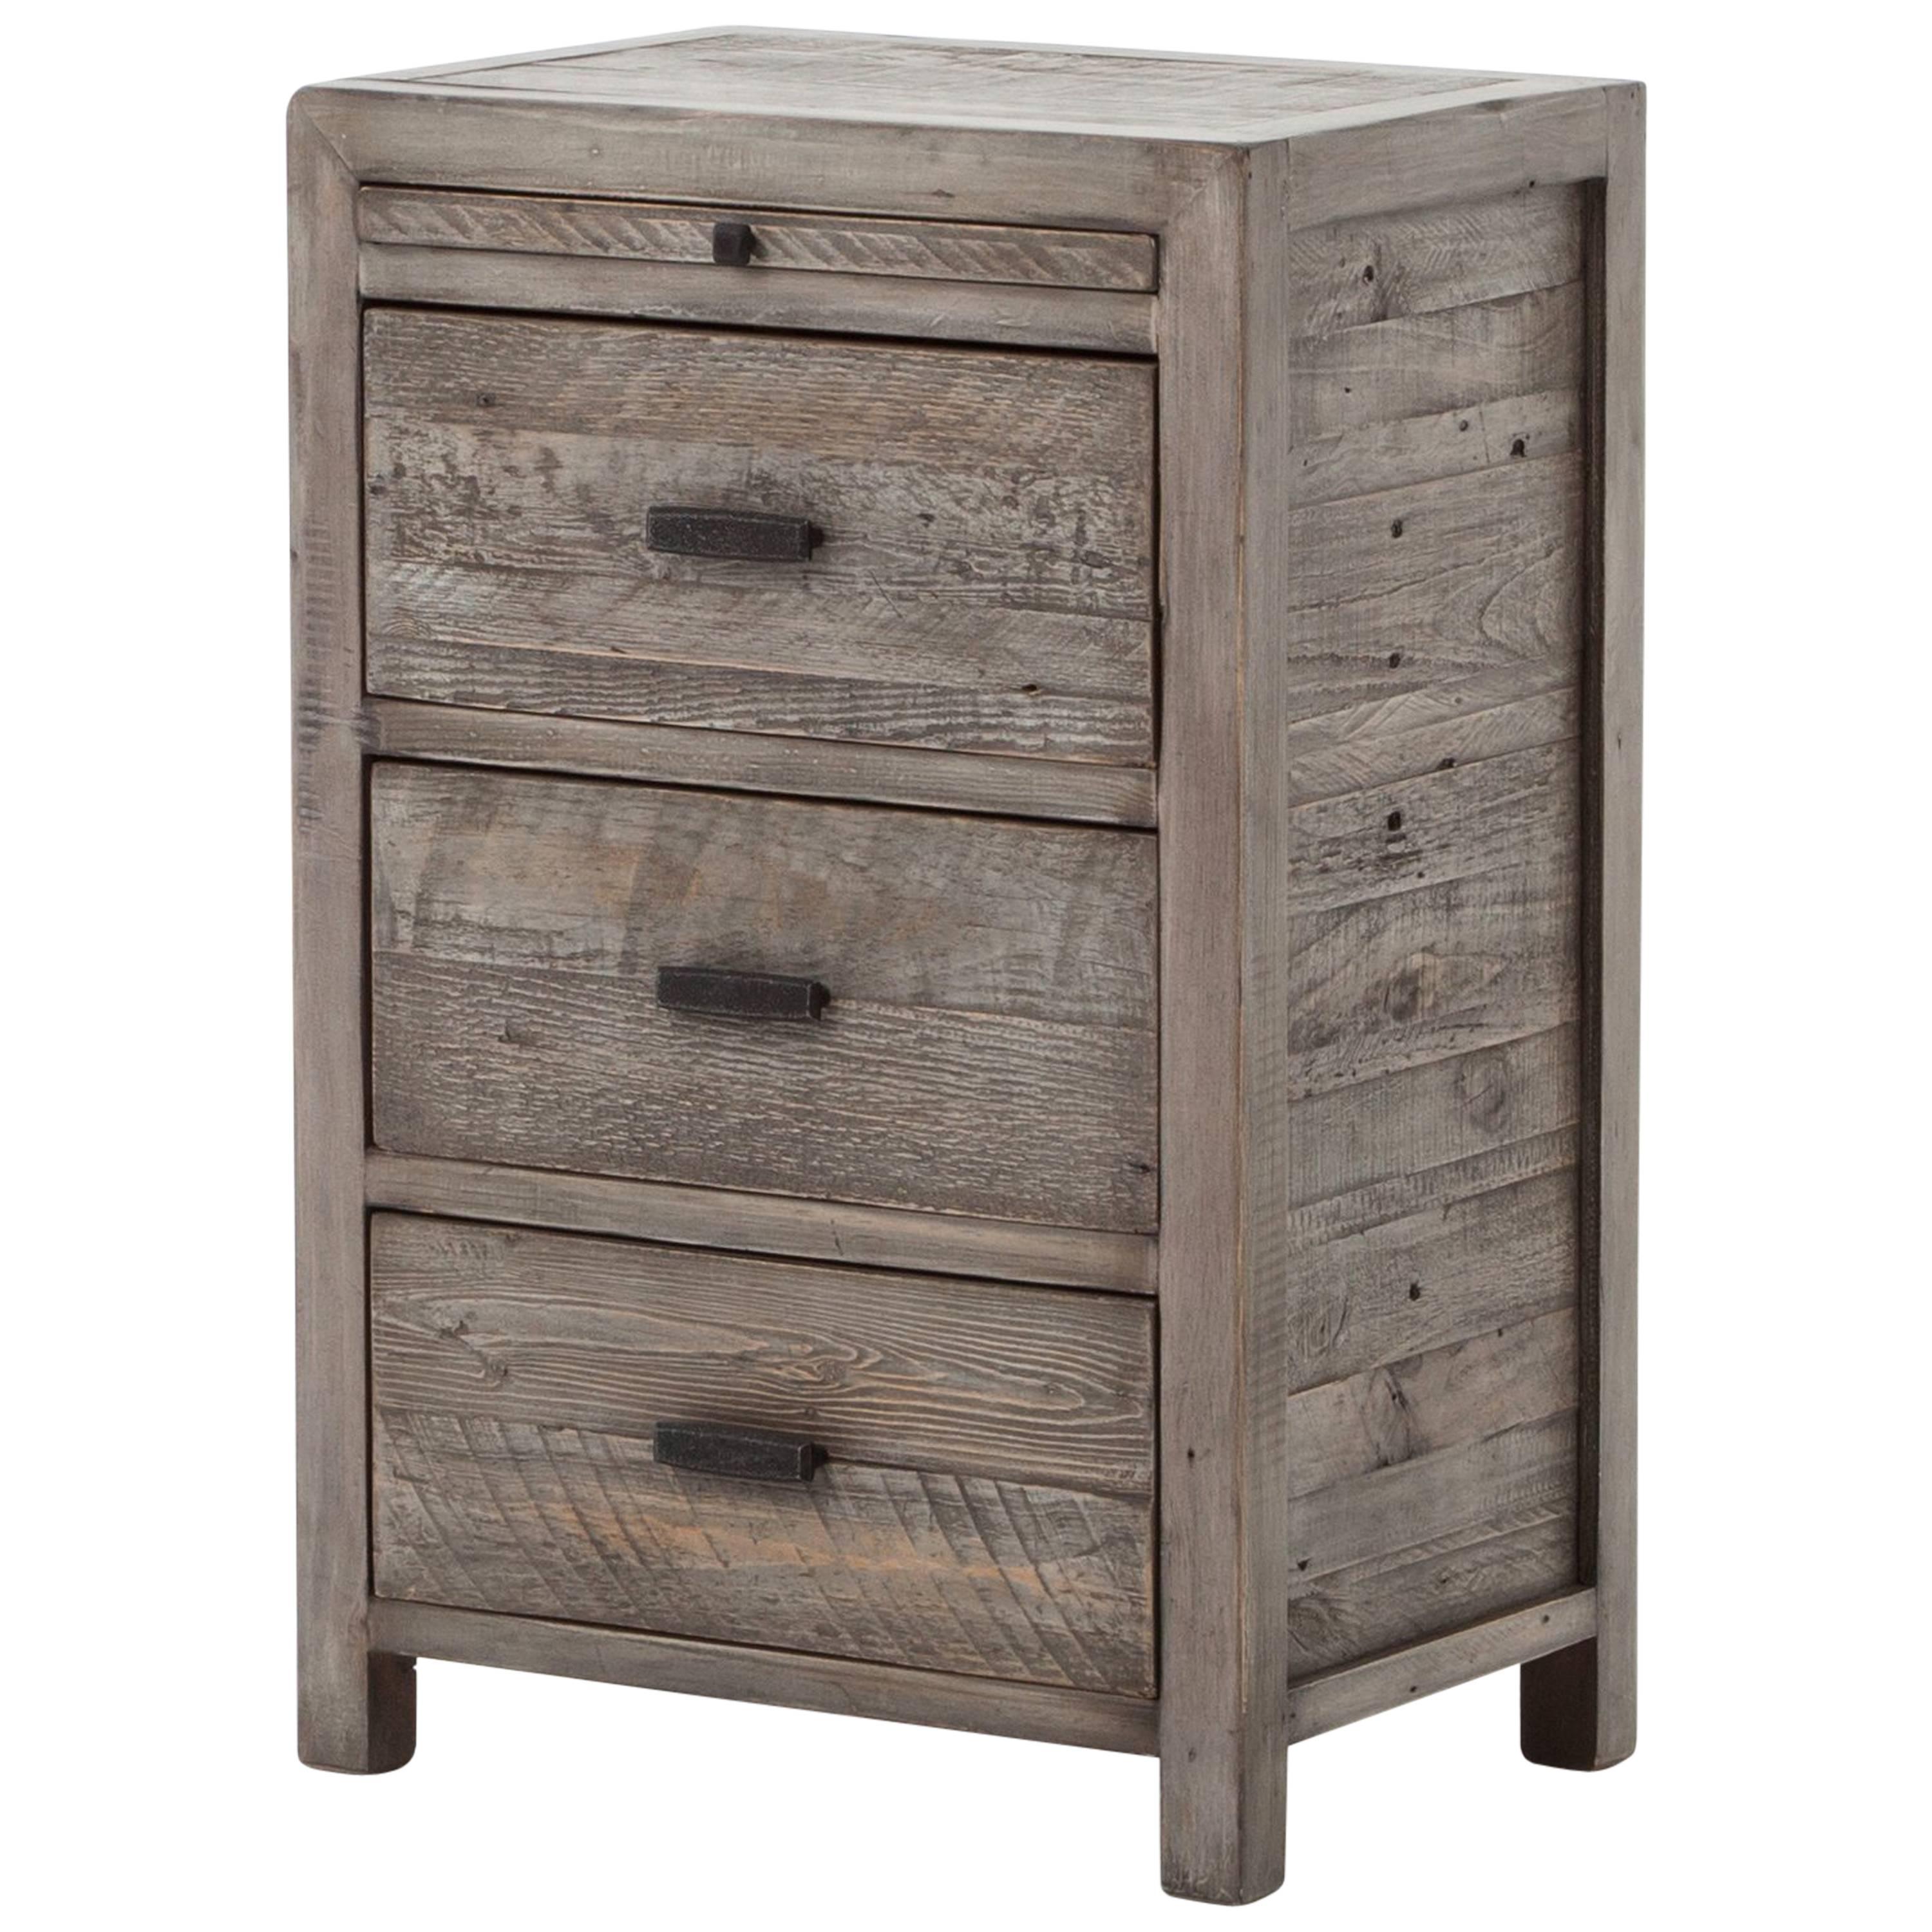 Reclaimed Wood Nightstand For Sale